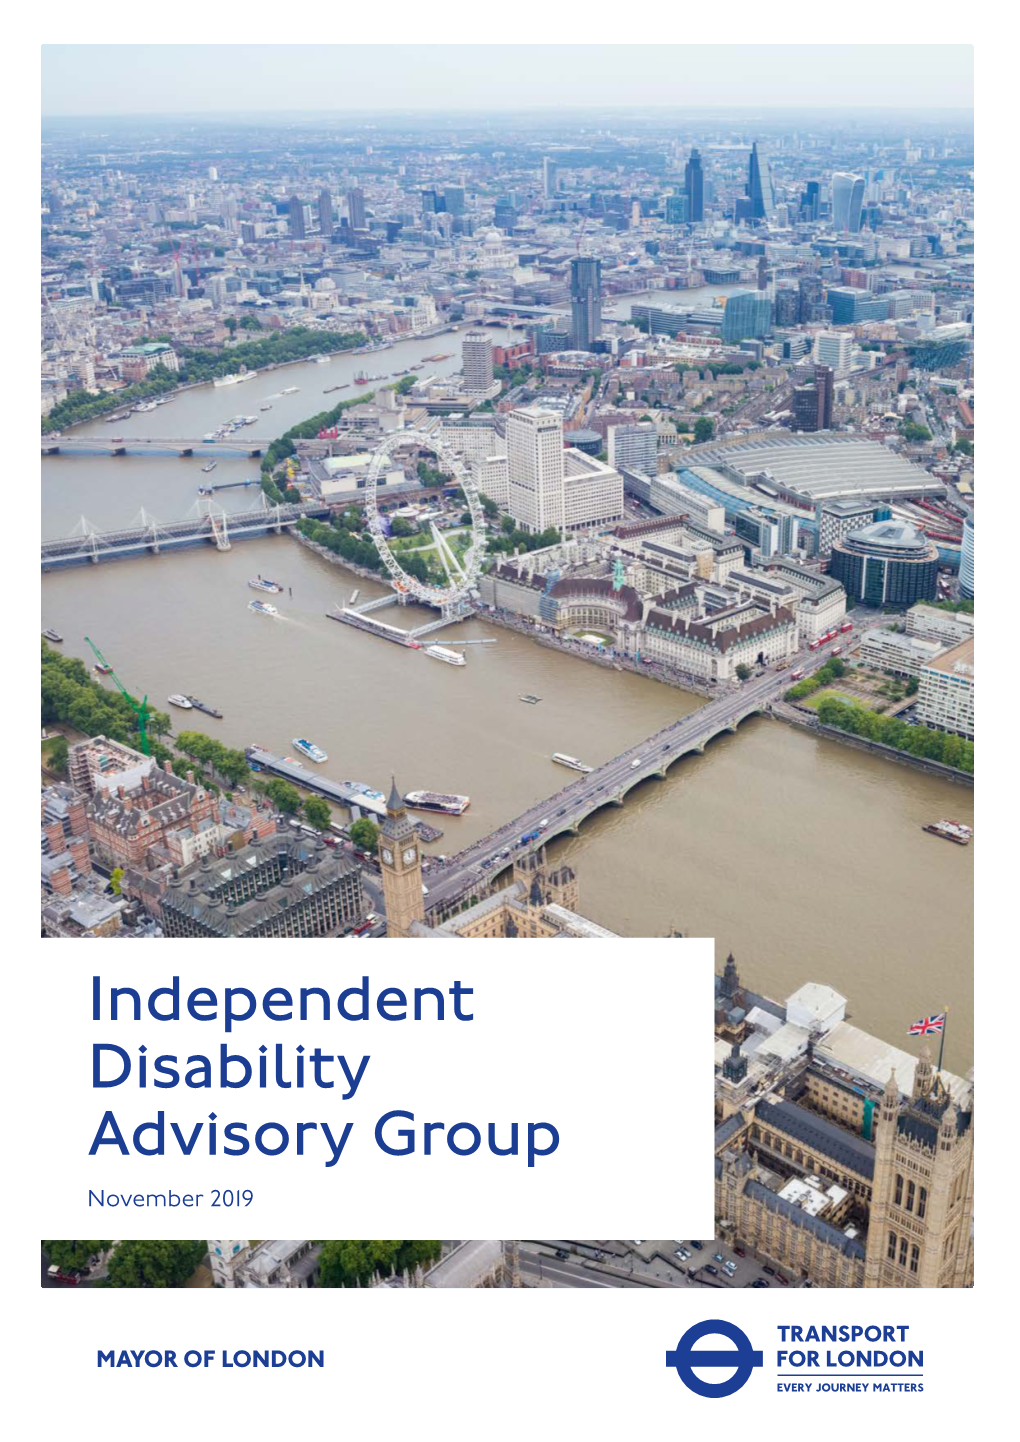 Independent Disability Advisory Group November 2019 Making London More Accessible and Inclusive